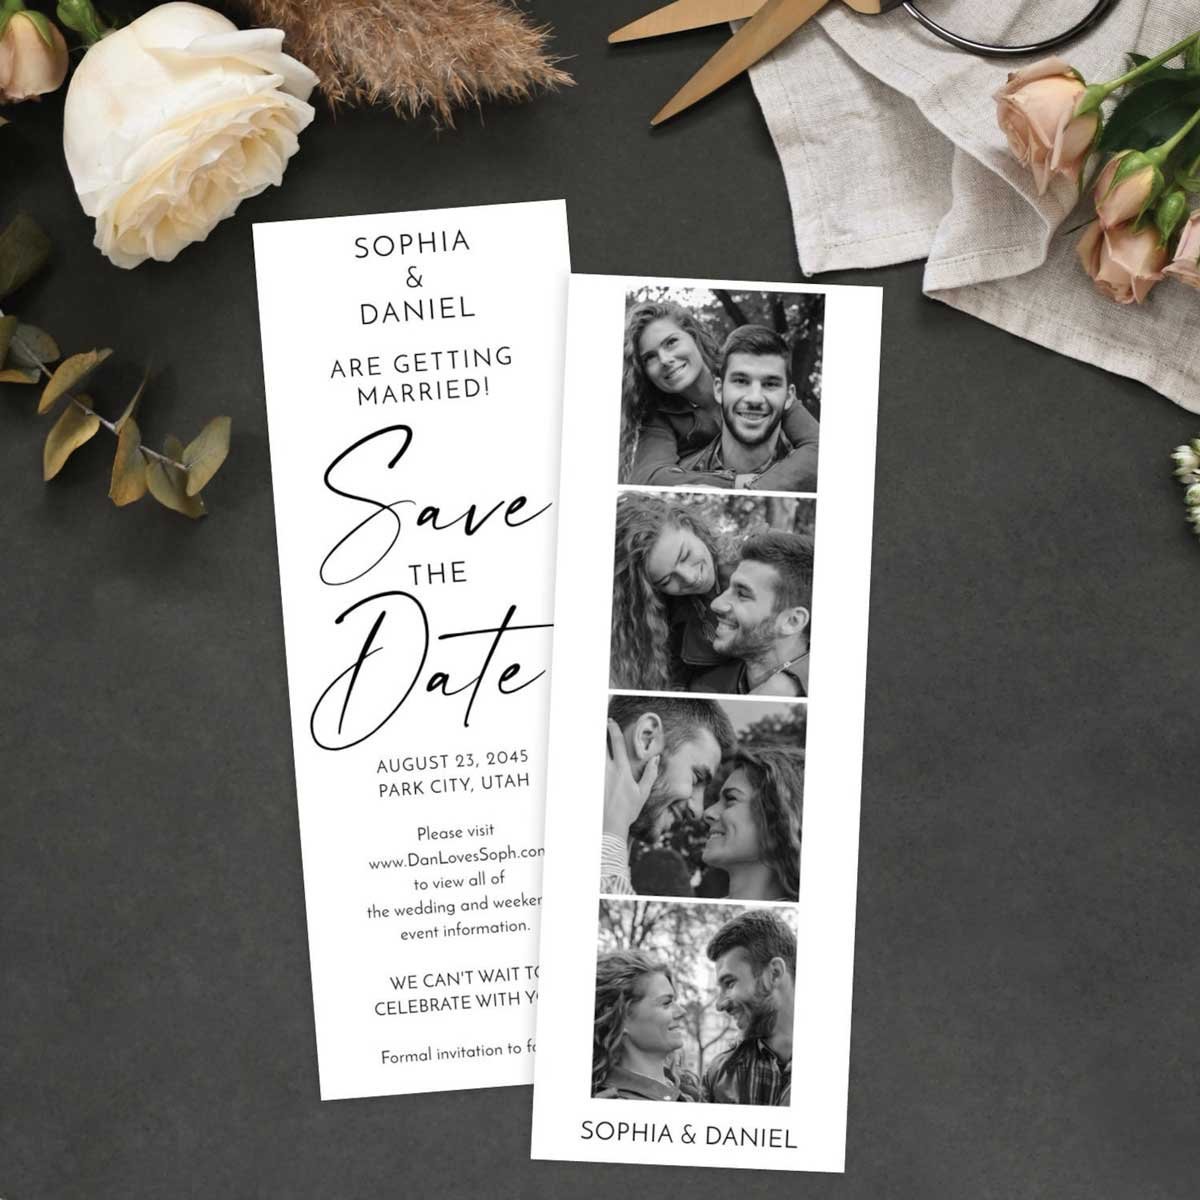 Save the Date Magnets - Barn Wedding (Set of 10)